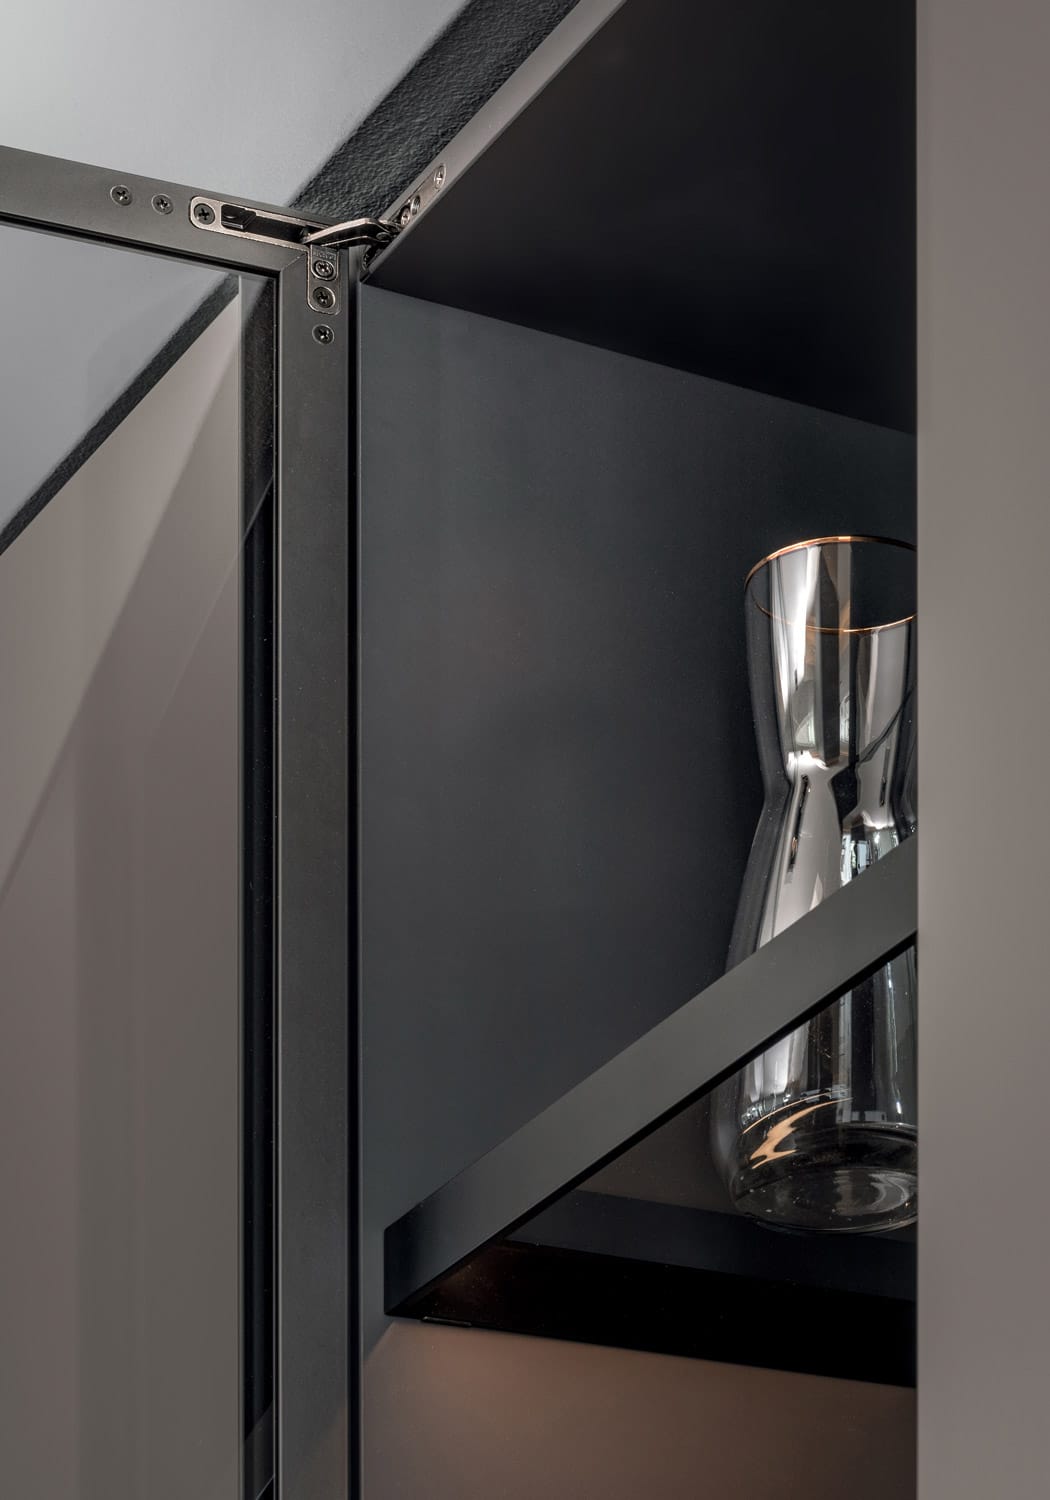 Inside, the glass shelves also feature a black lacquered aluminum profile. 